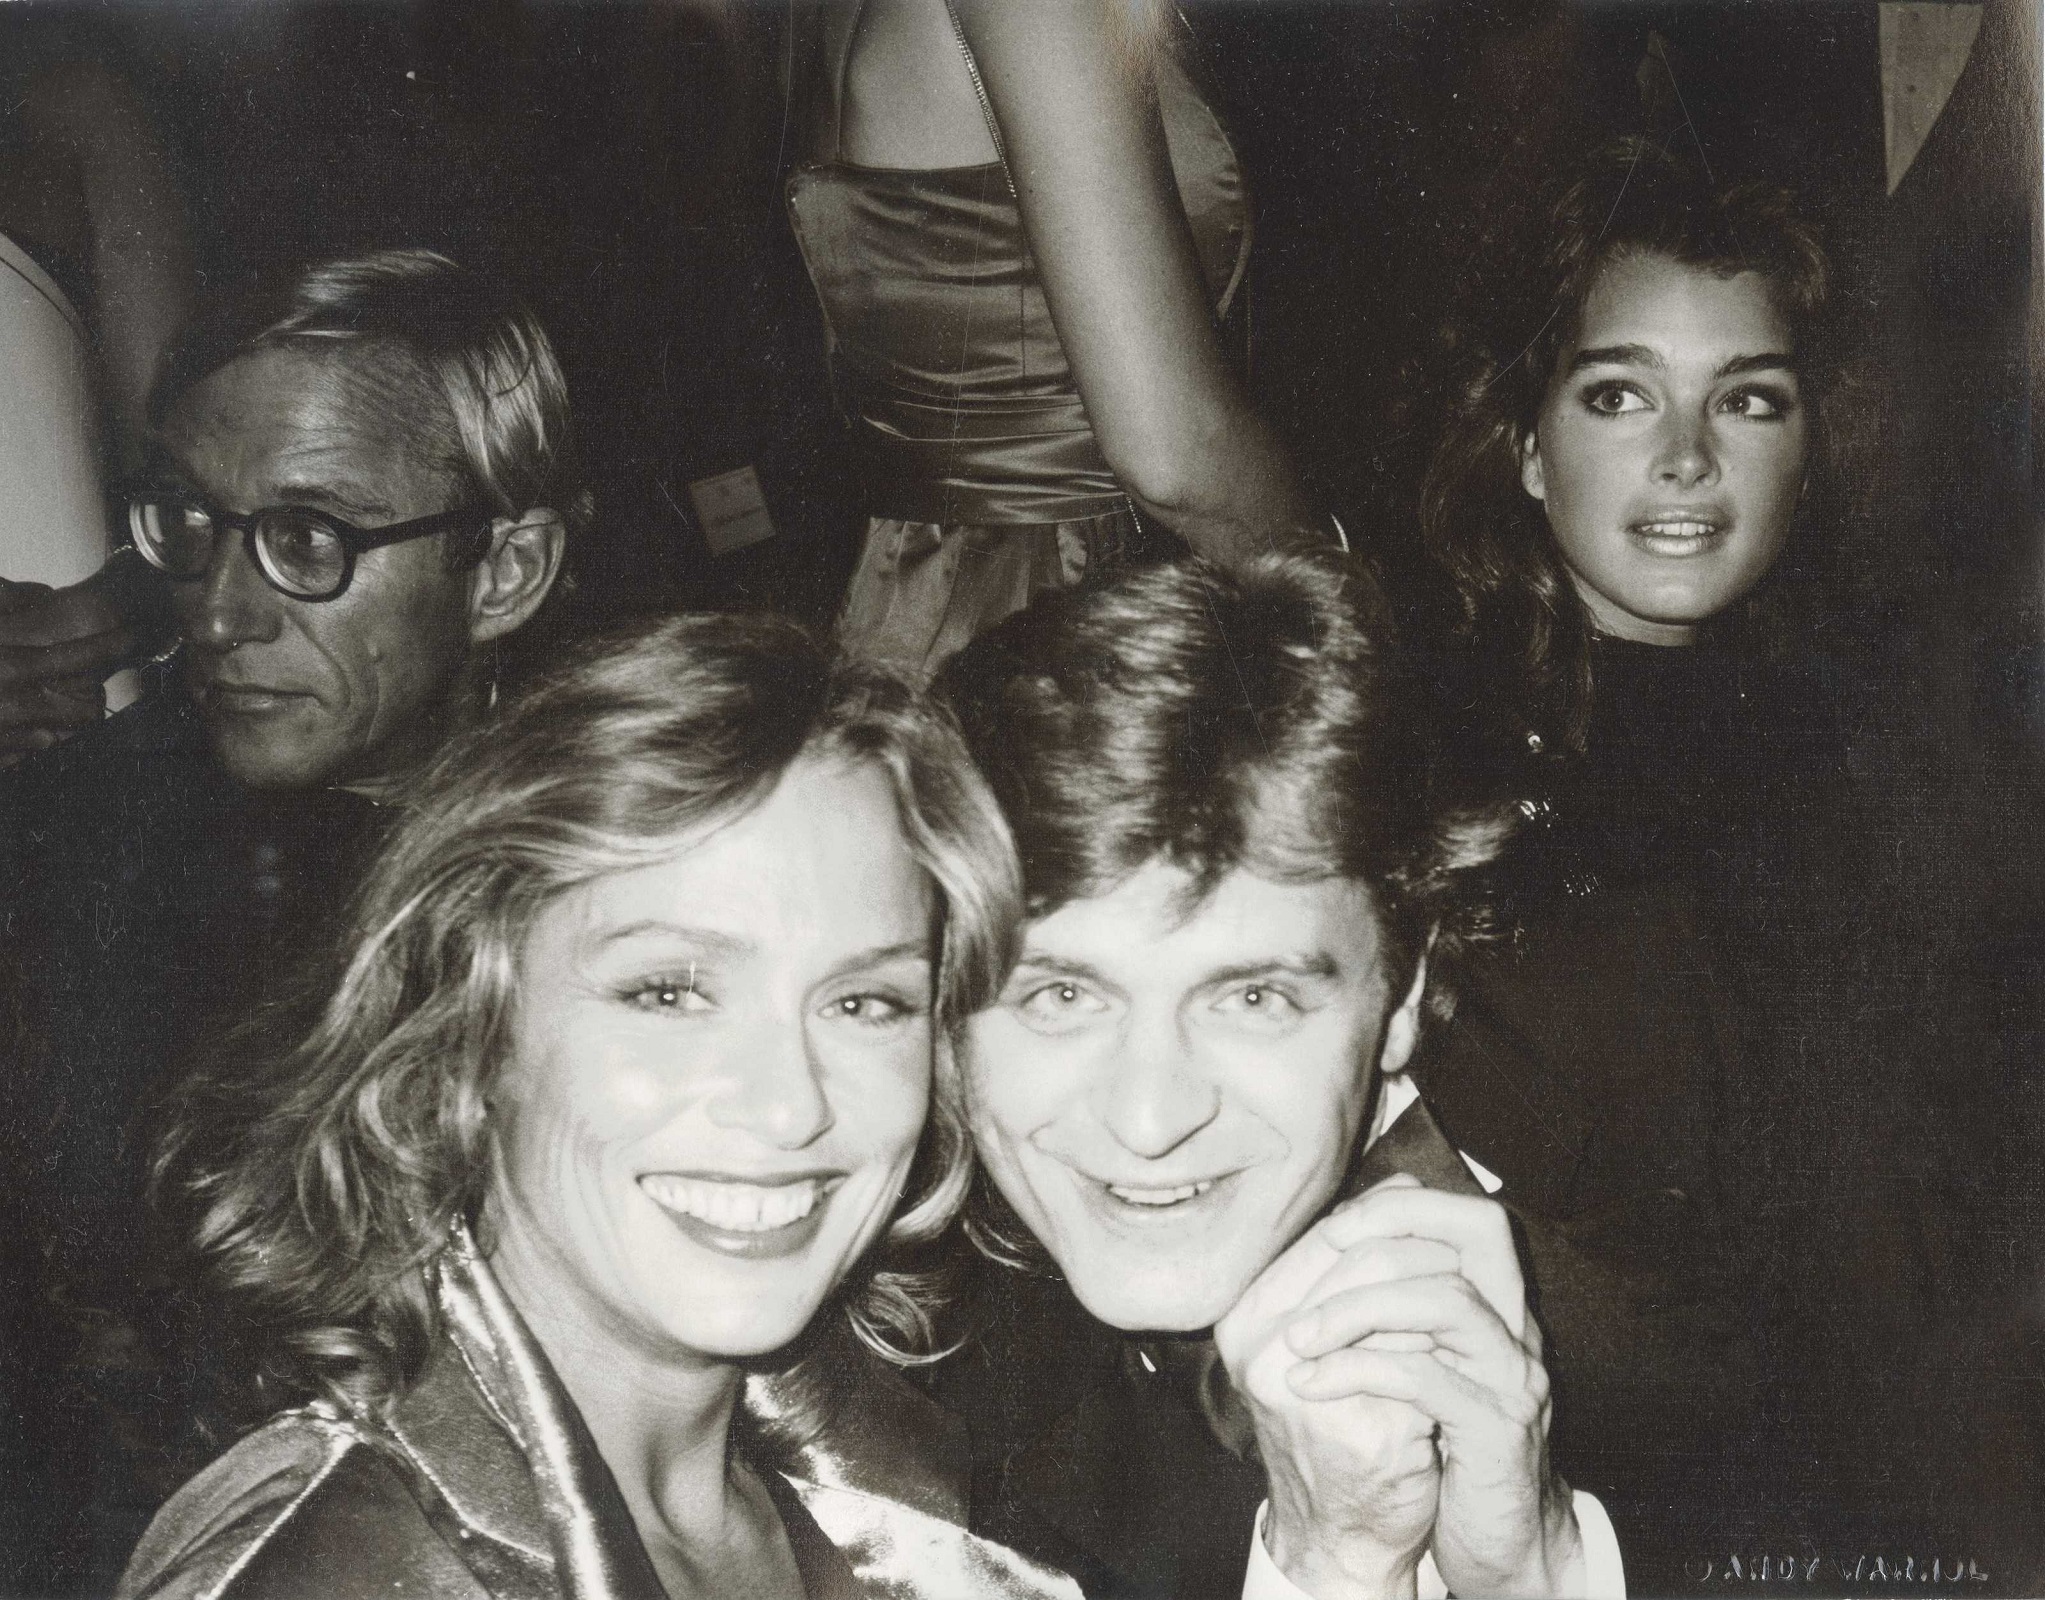 Studio 54 was a Hub for Revelry and Excess